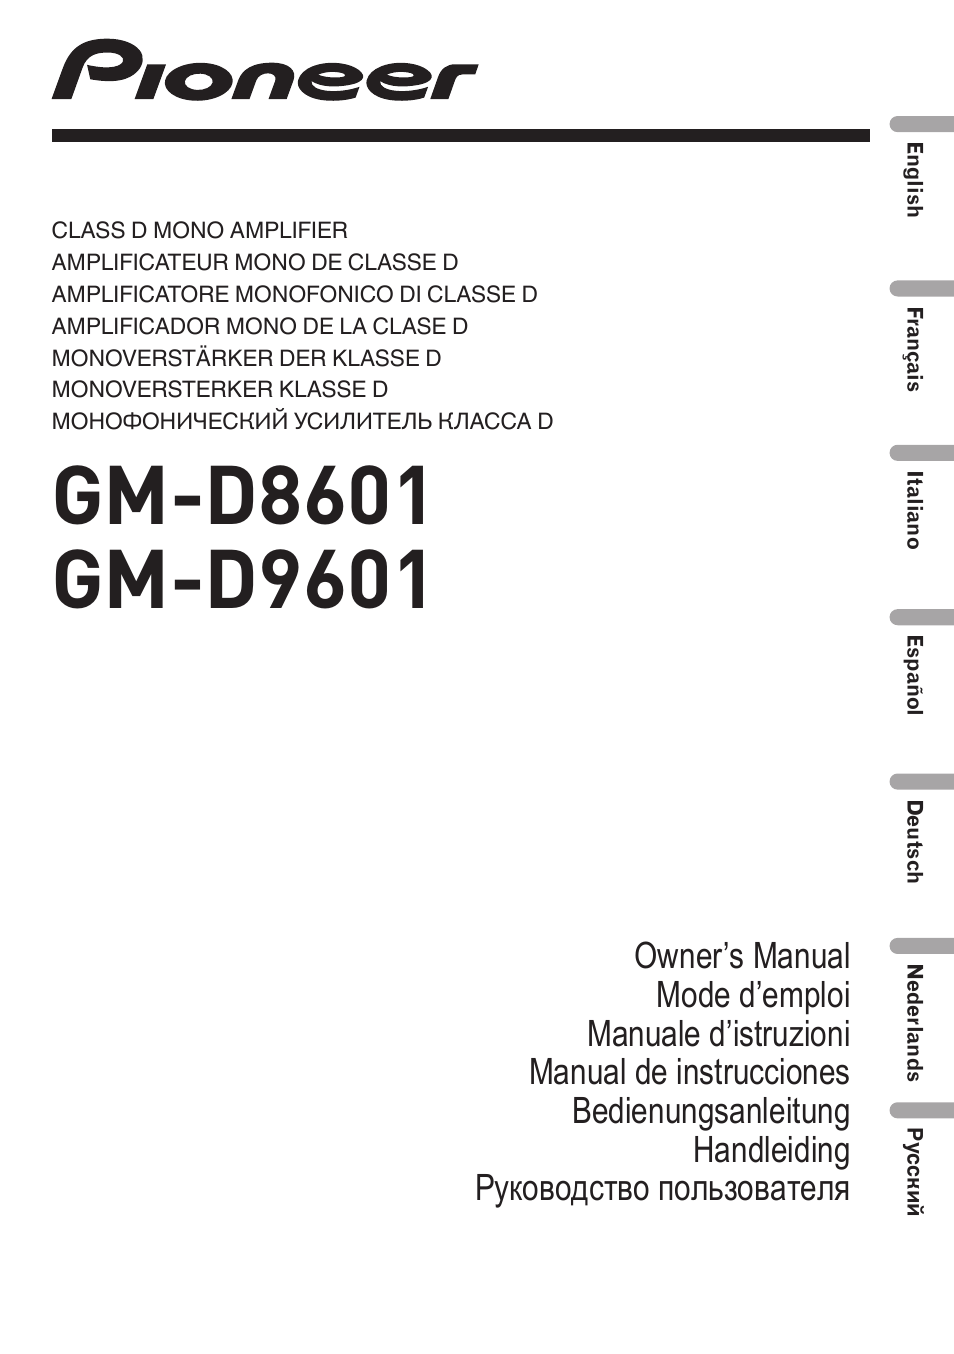 Pioneer GM-D8601 User Manual | 92 pages | Also for: GM-D9601